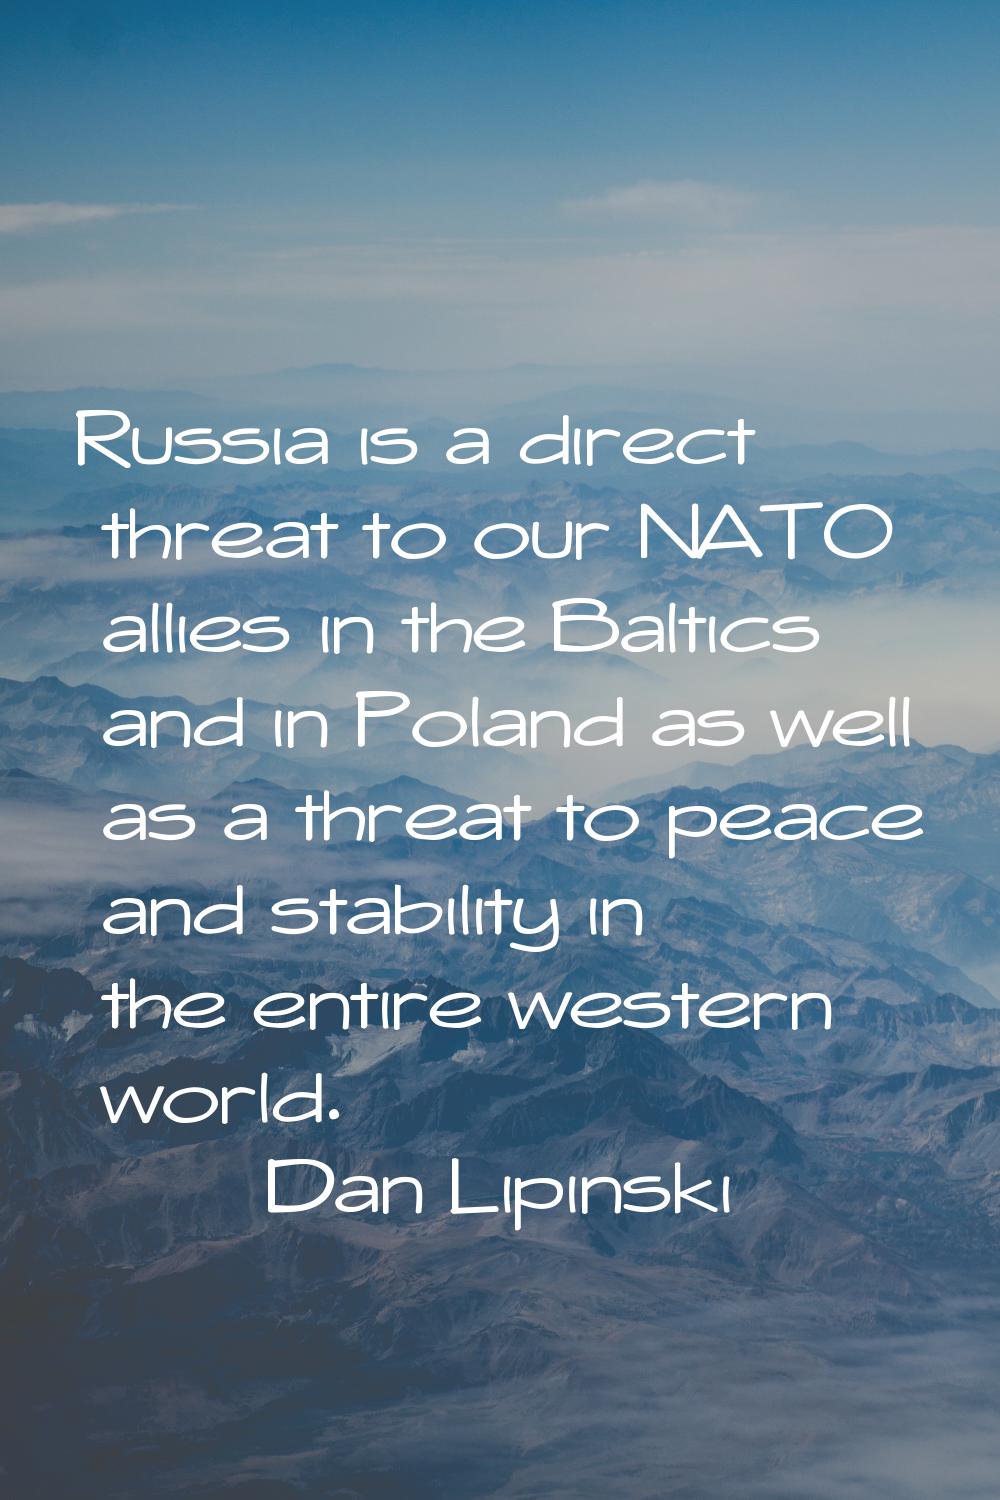 Russia is a direct threat to our NATO allies in the Baltics and in Poland as well as a threat to pe